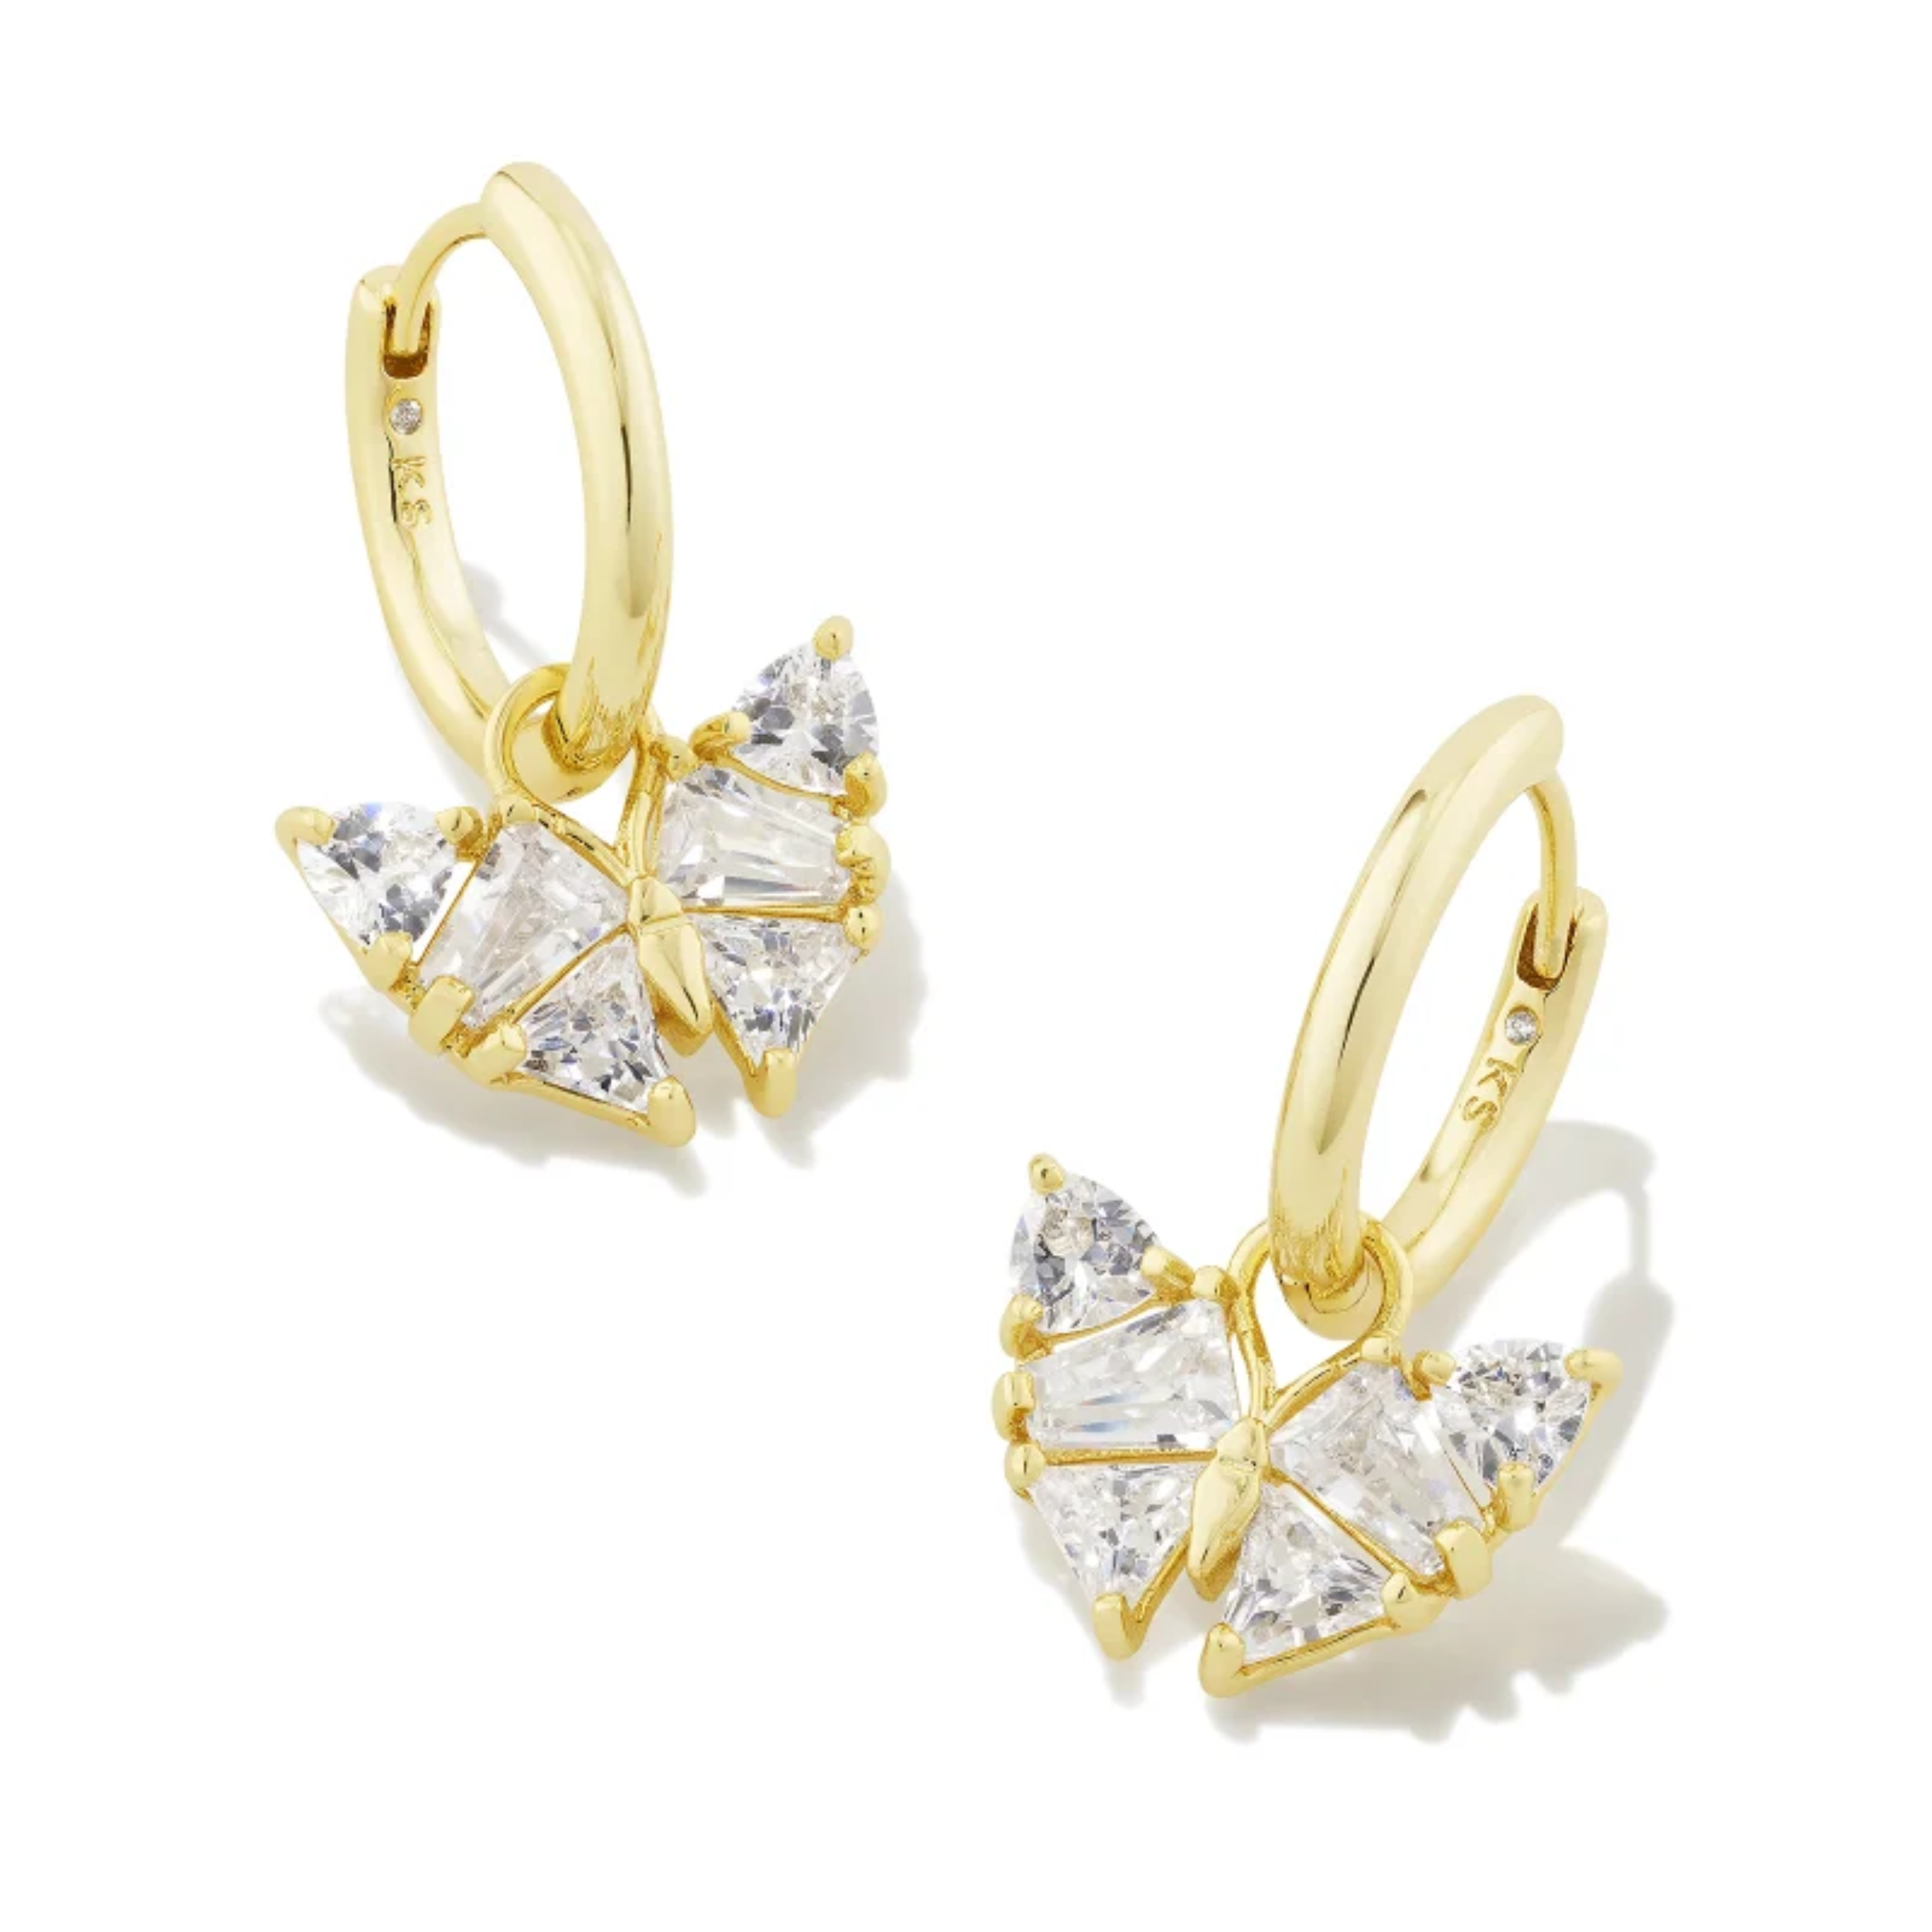 These Blair Gold Butterfly Huggie Earrings in White Crystal by Kendra Scott are pictured on a white background.